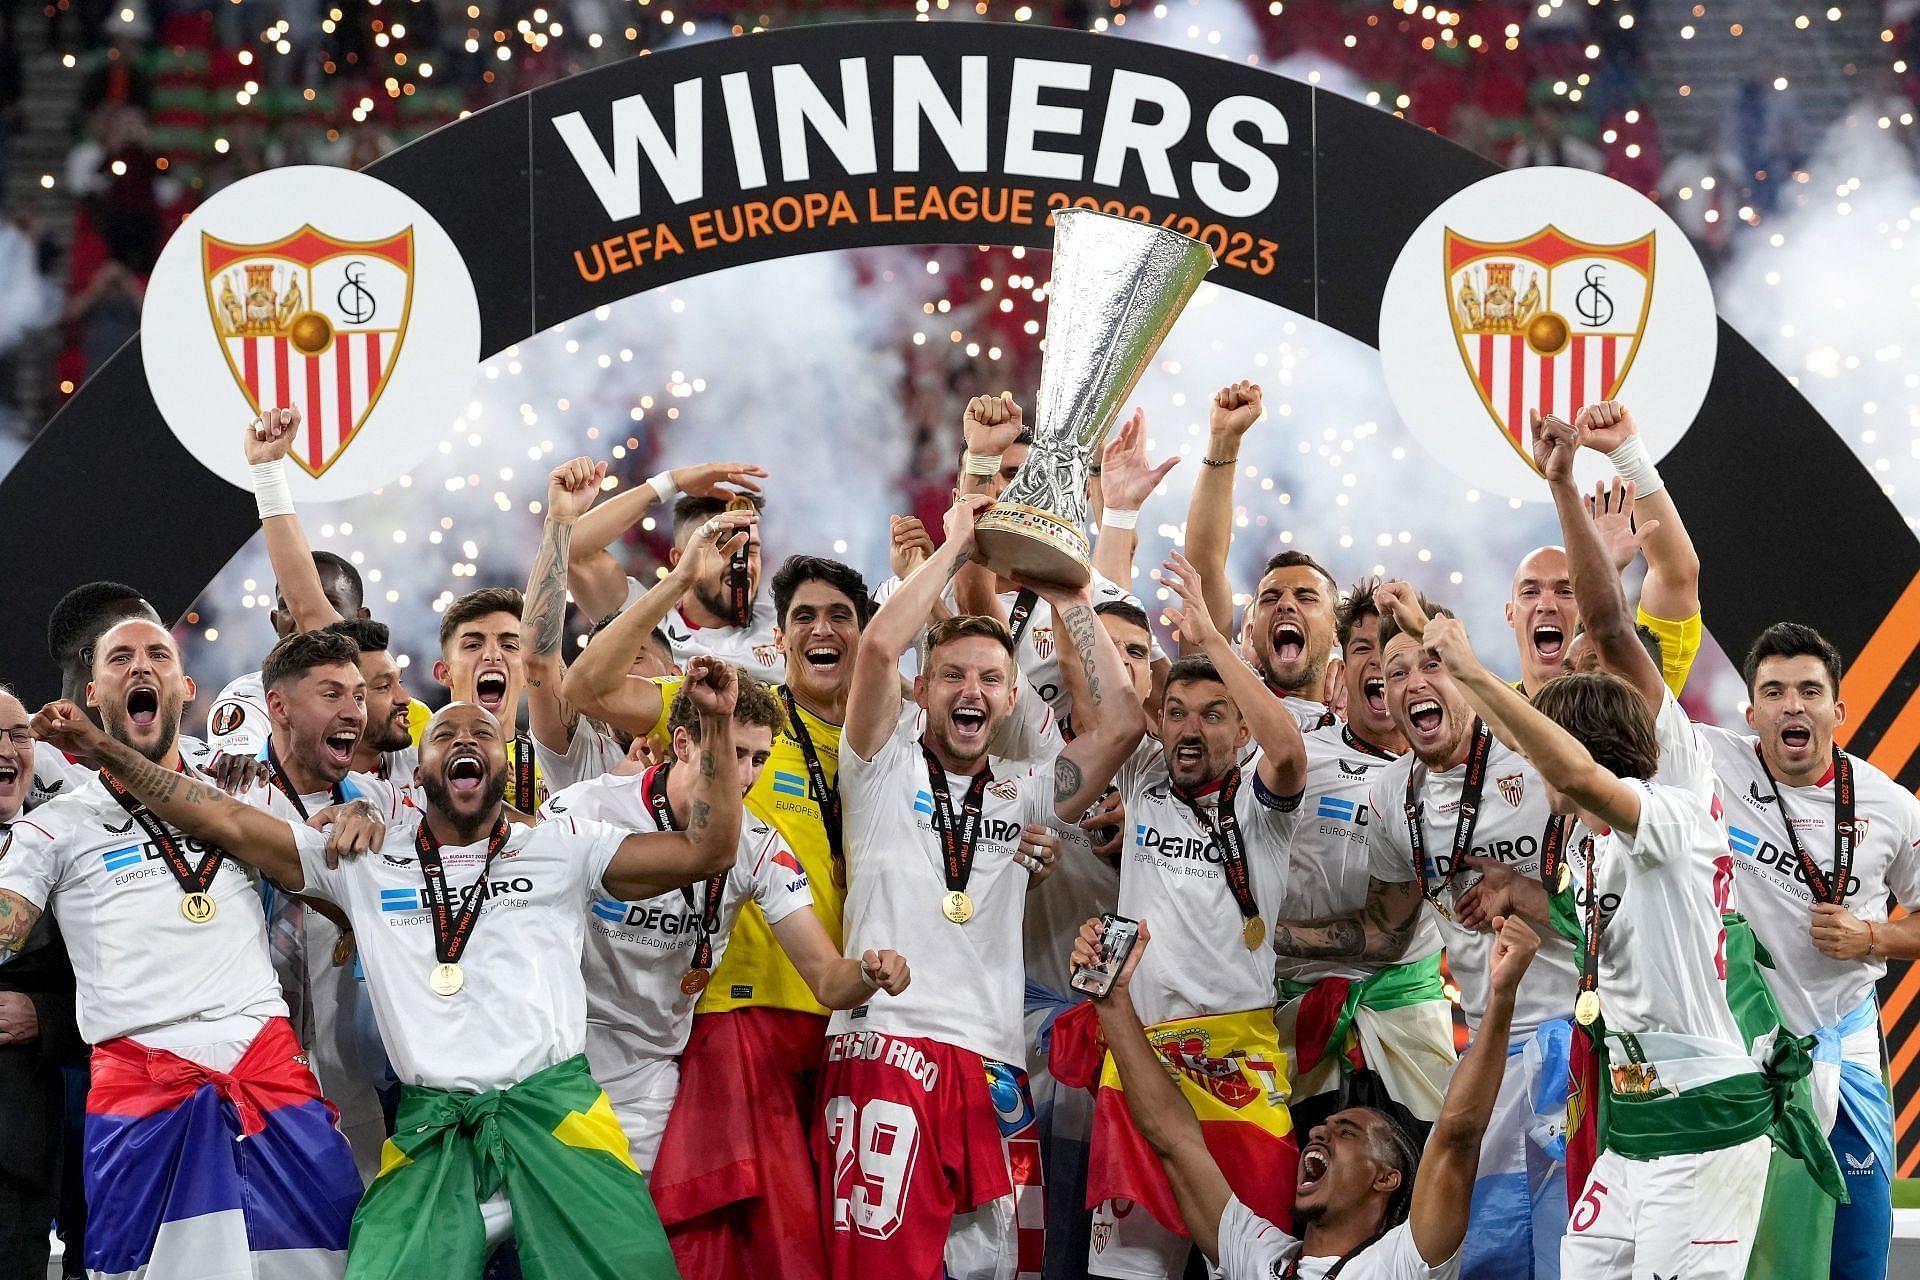 Sevilla have failed to replicate their Europa League success in the Champions League.